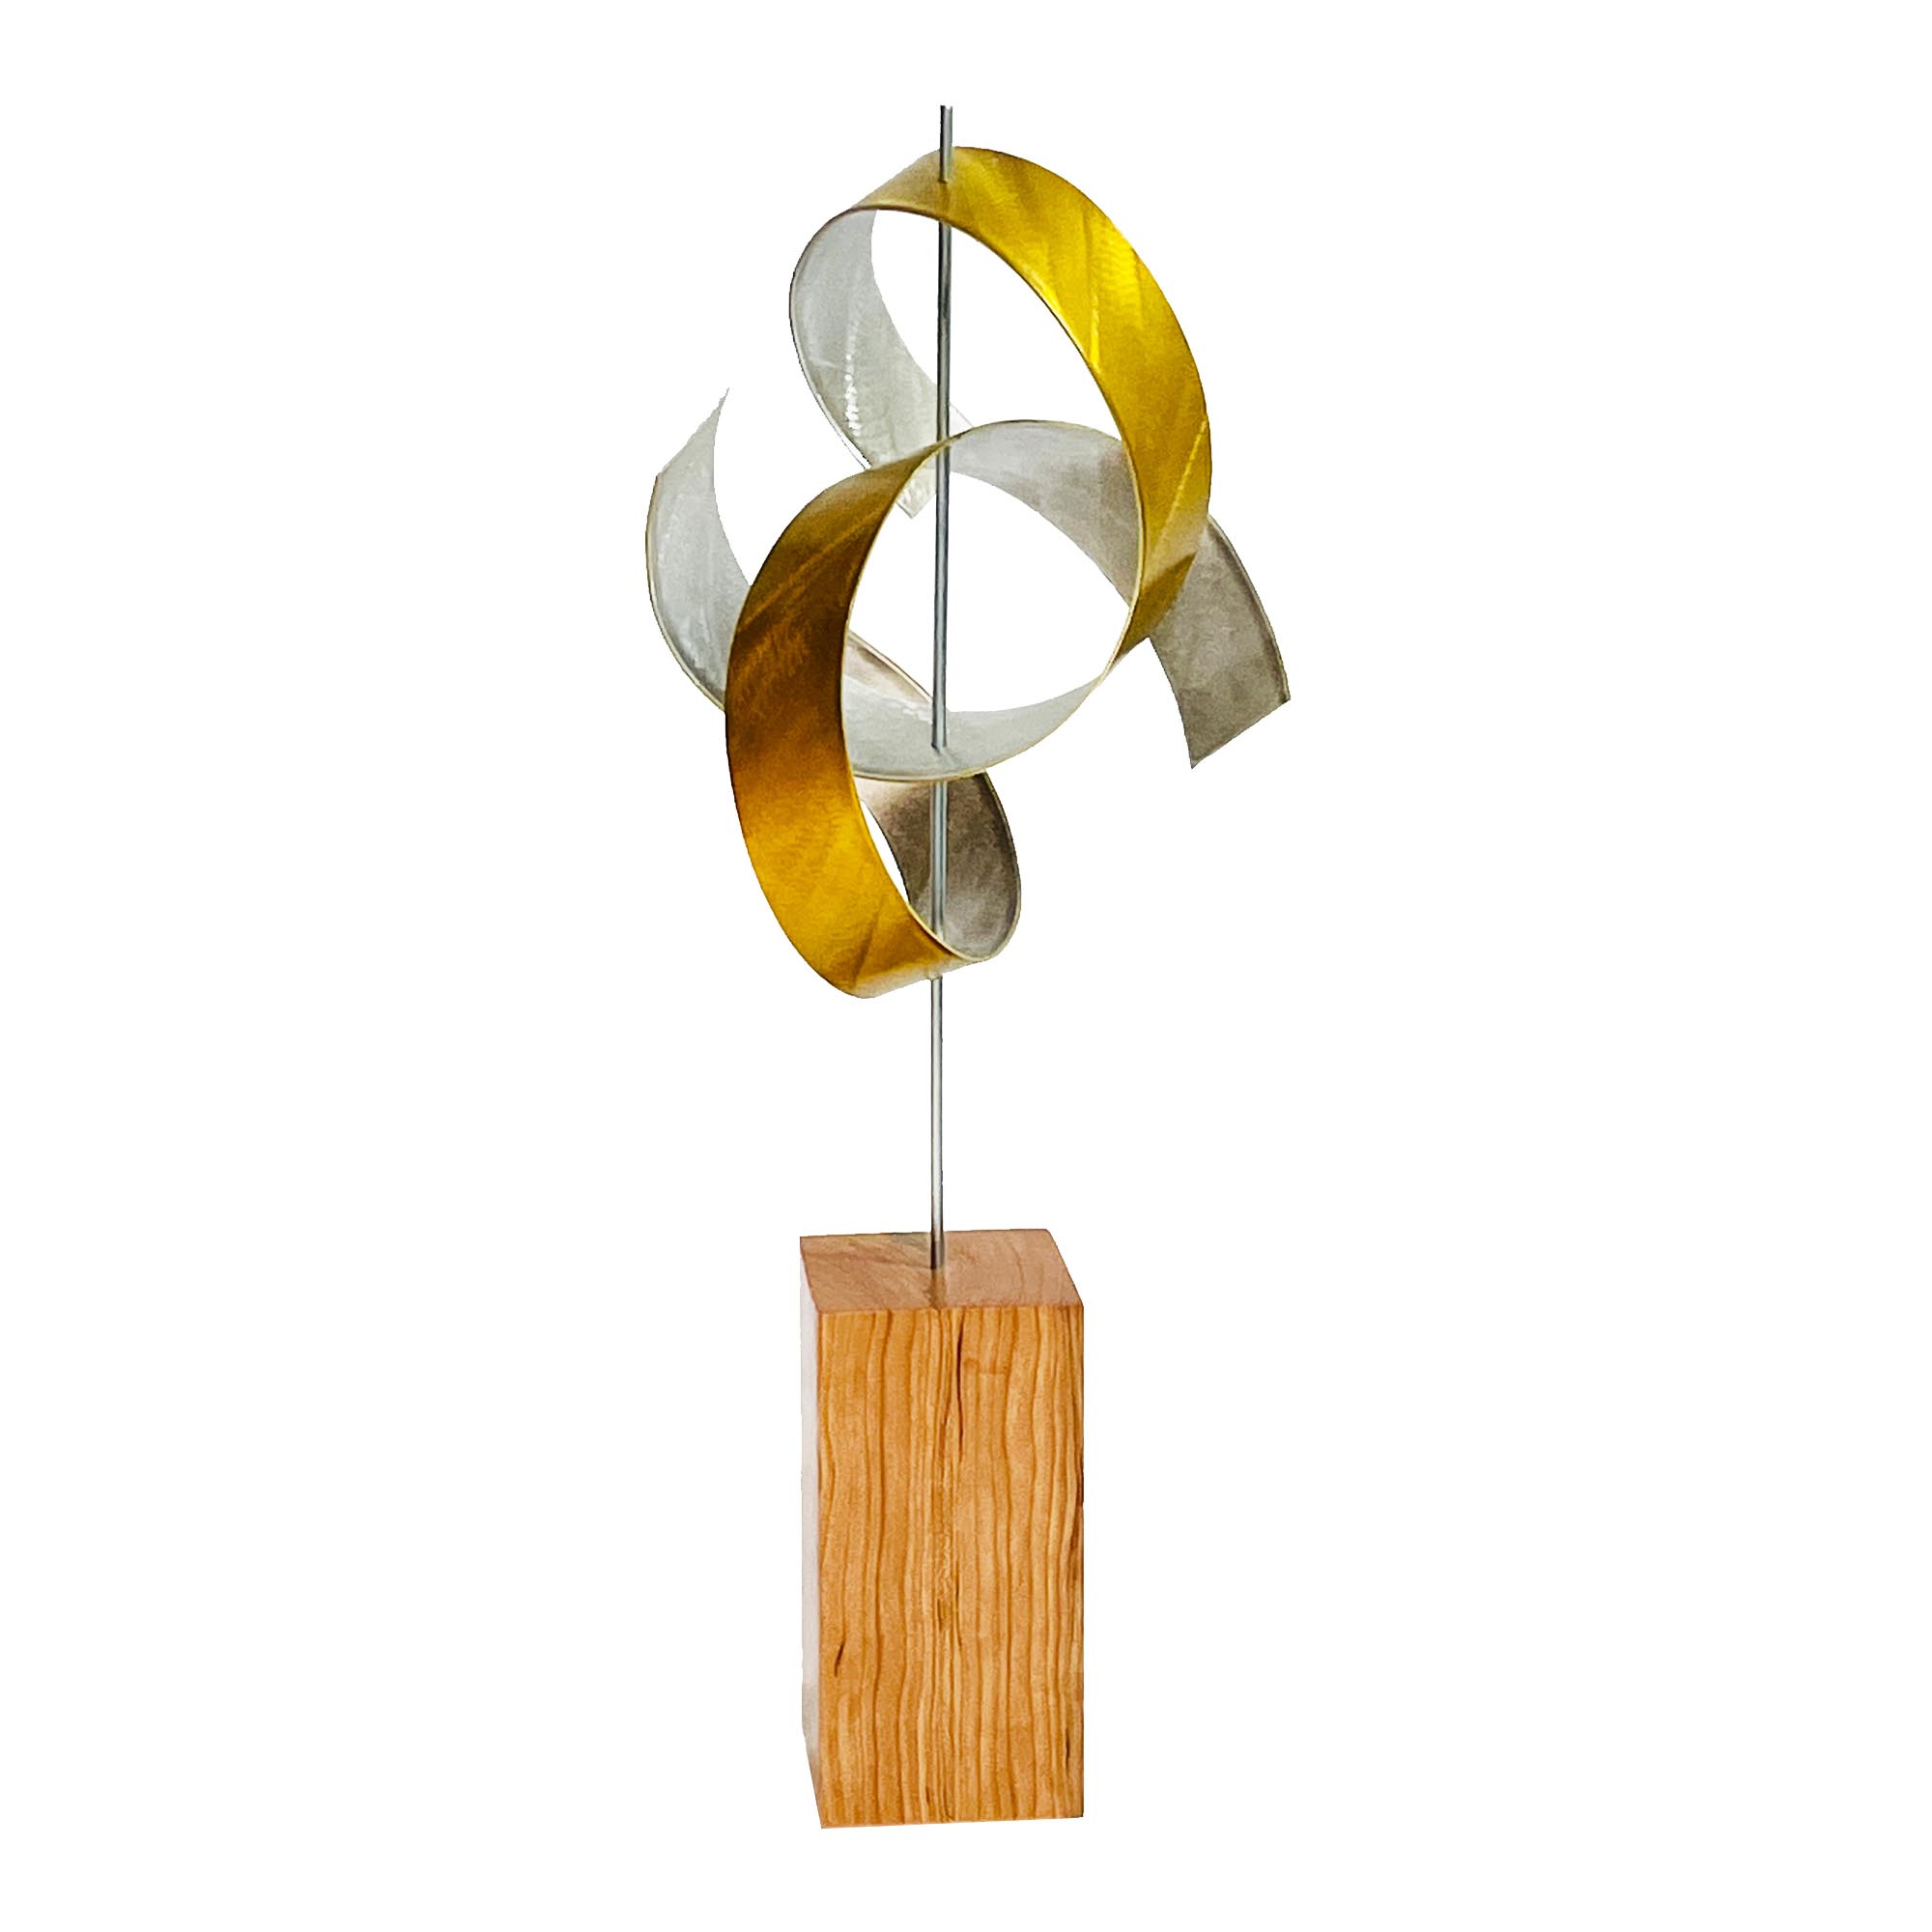 Rings Gold Cherry by Jackson Wright - Abstract Wood Sculpture, Kinetic Sculpture - Image 3